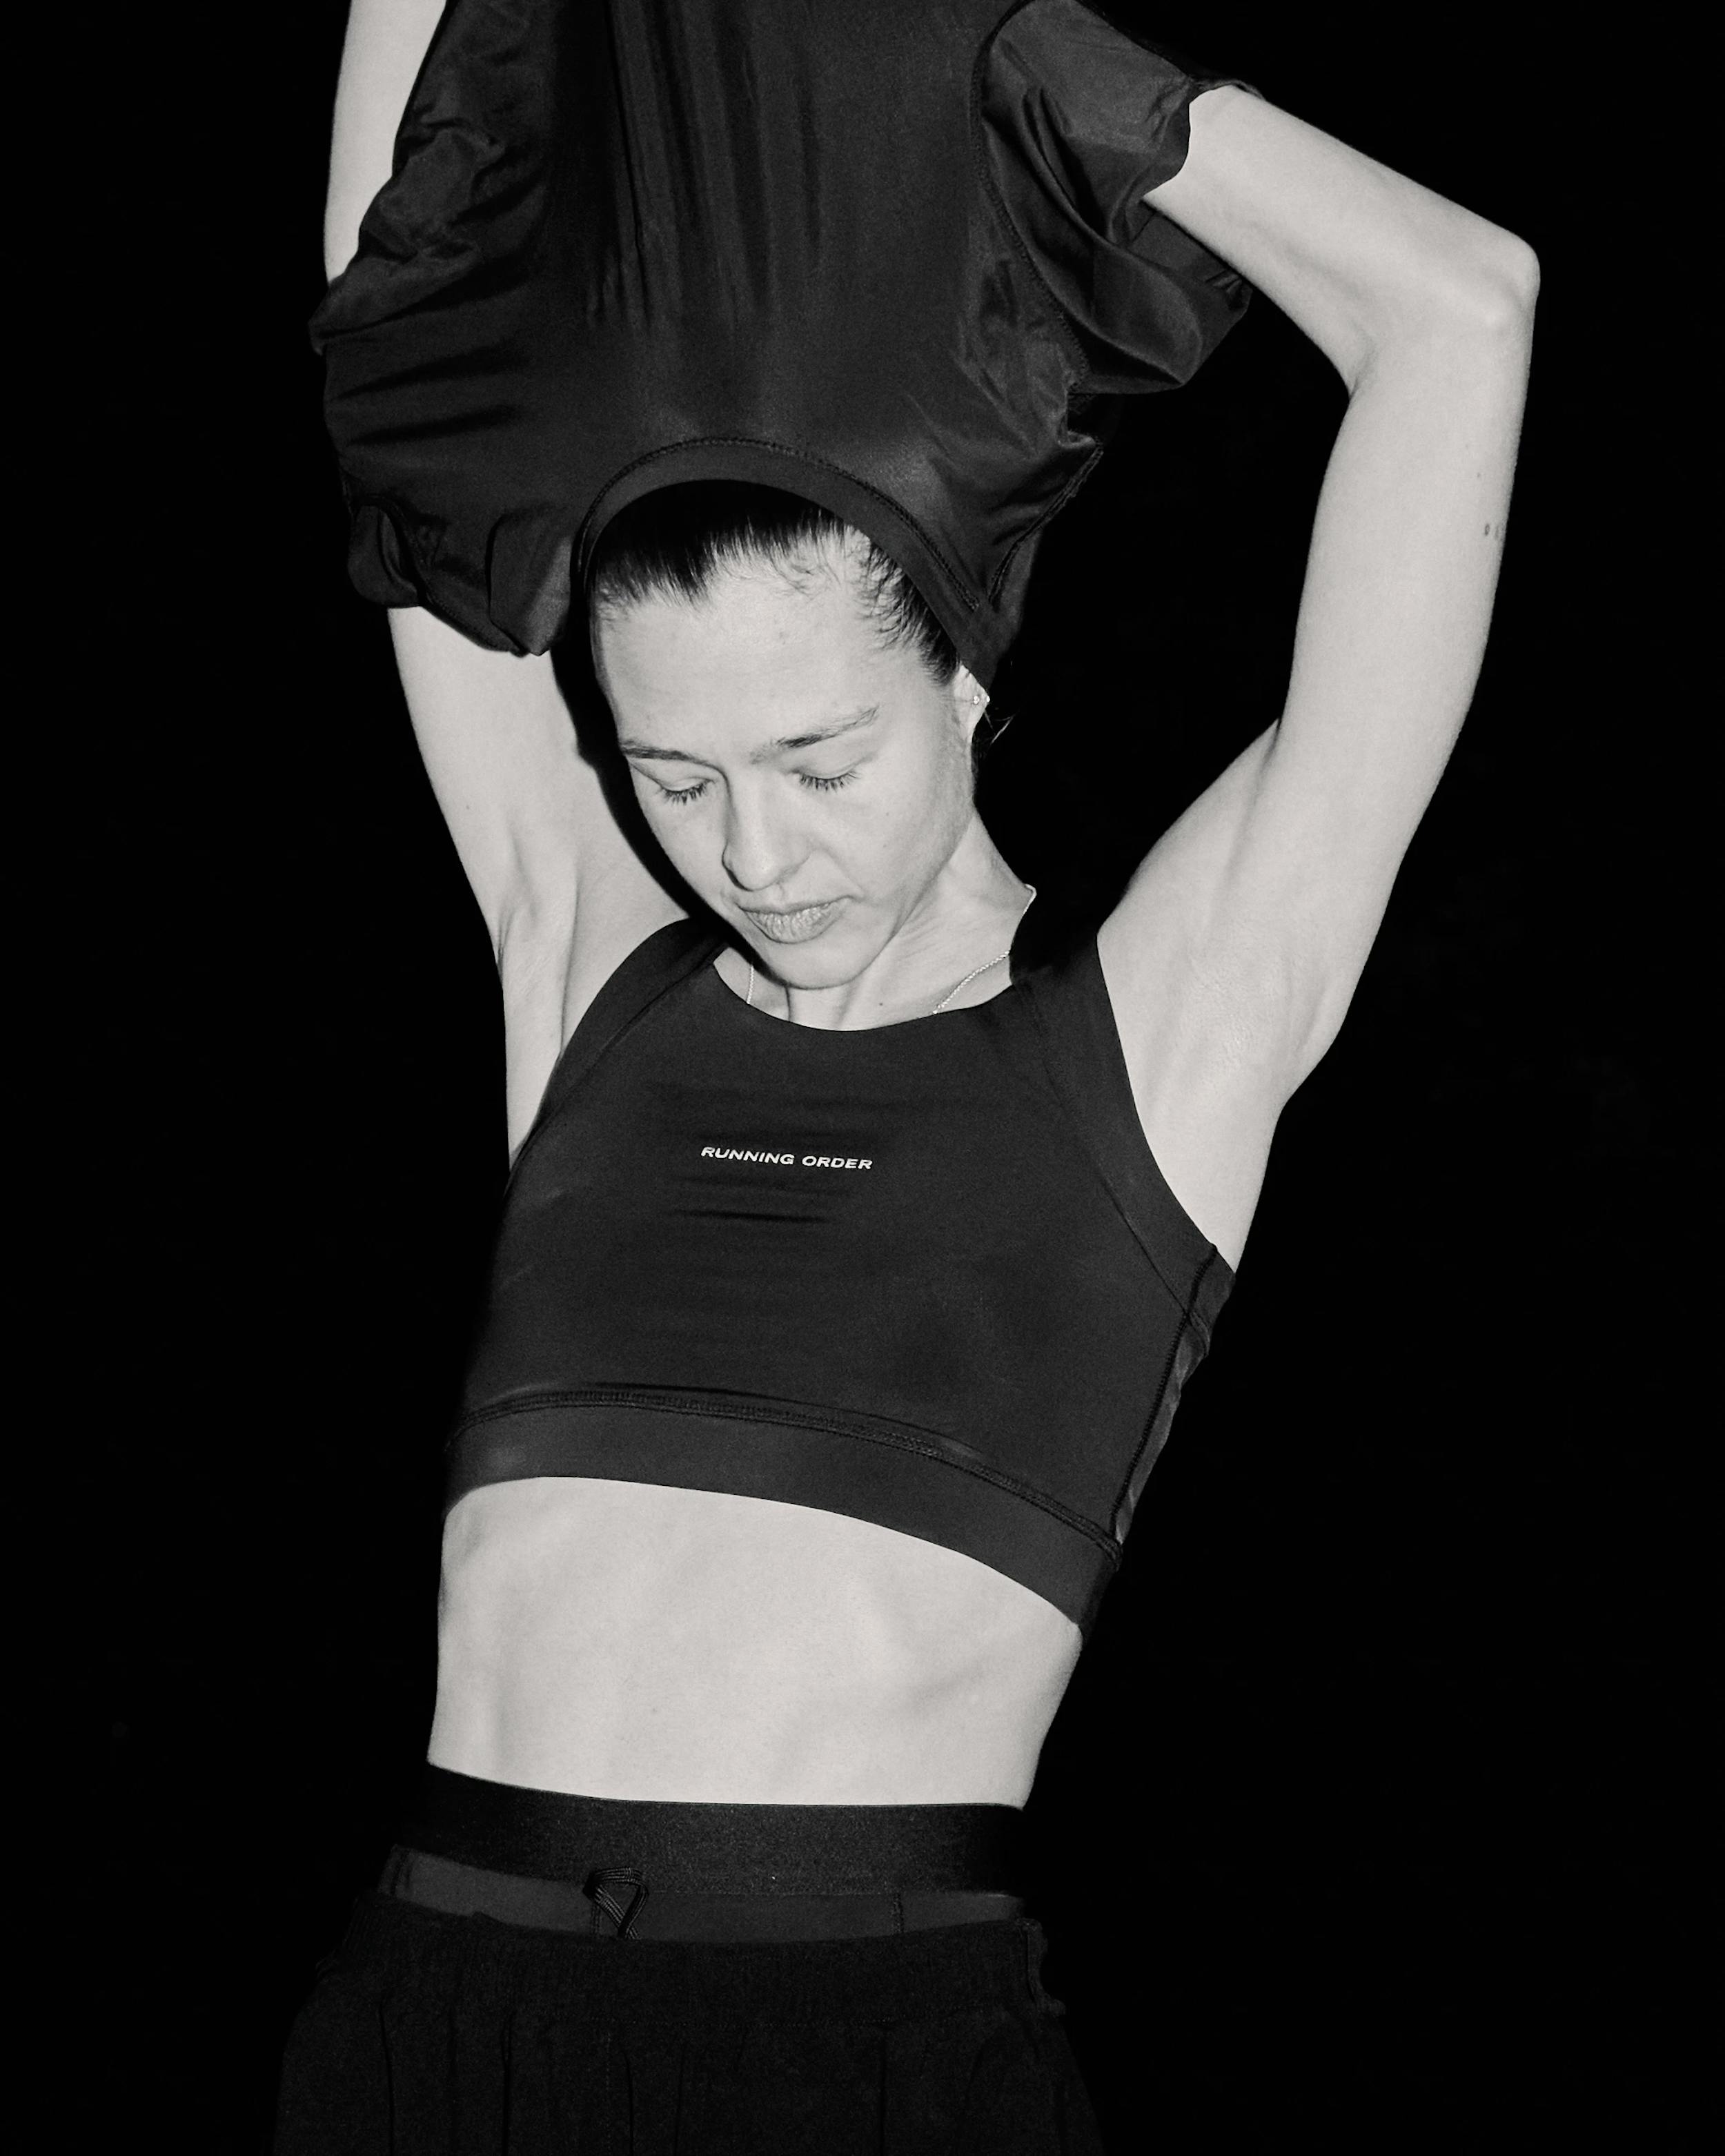 BERLIN NIGHT RUN - JULIA WEARS THE SEDEF SPORTS BRA - COLLECTION 02 - Photographed by Jack Hare